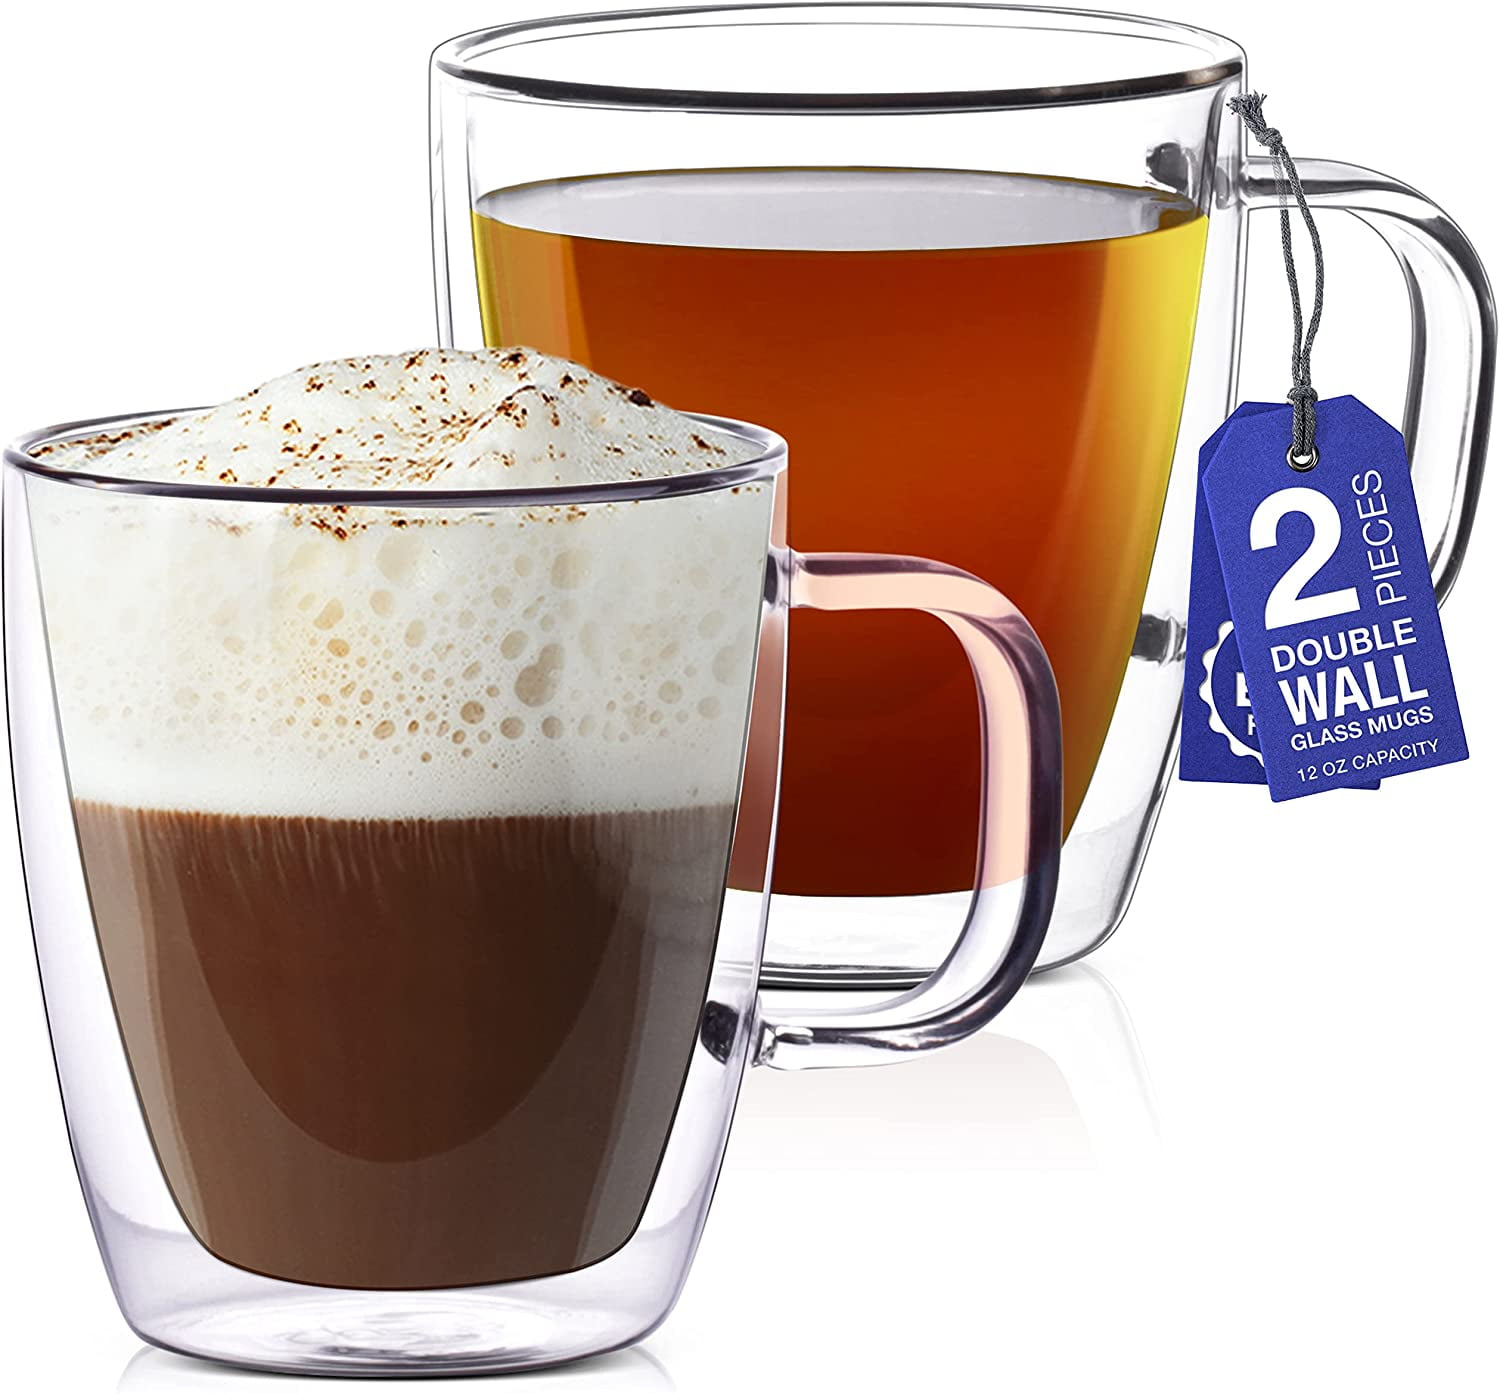 Insulated Glassware Clear Glass Double Wall Cup Set Eparé Coffee Mugs Best Large Coffee Espresso Latte Tea Glasses 